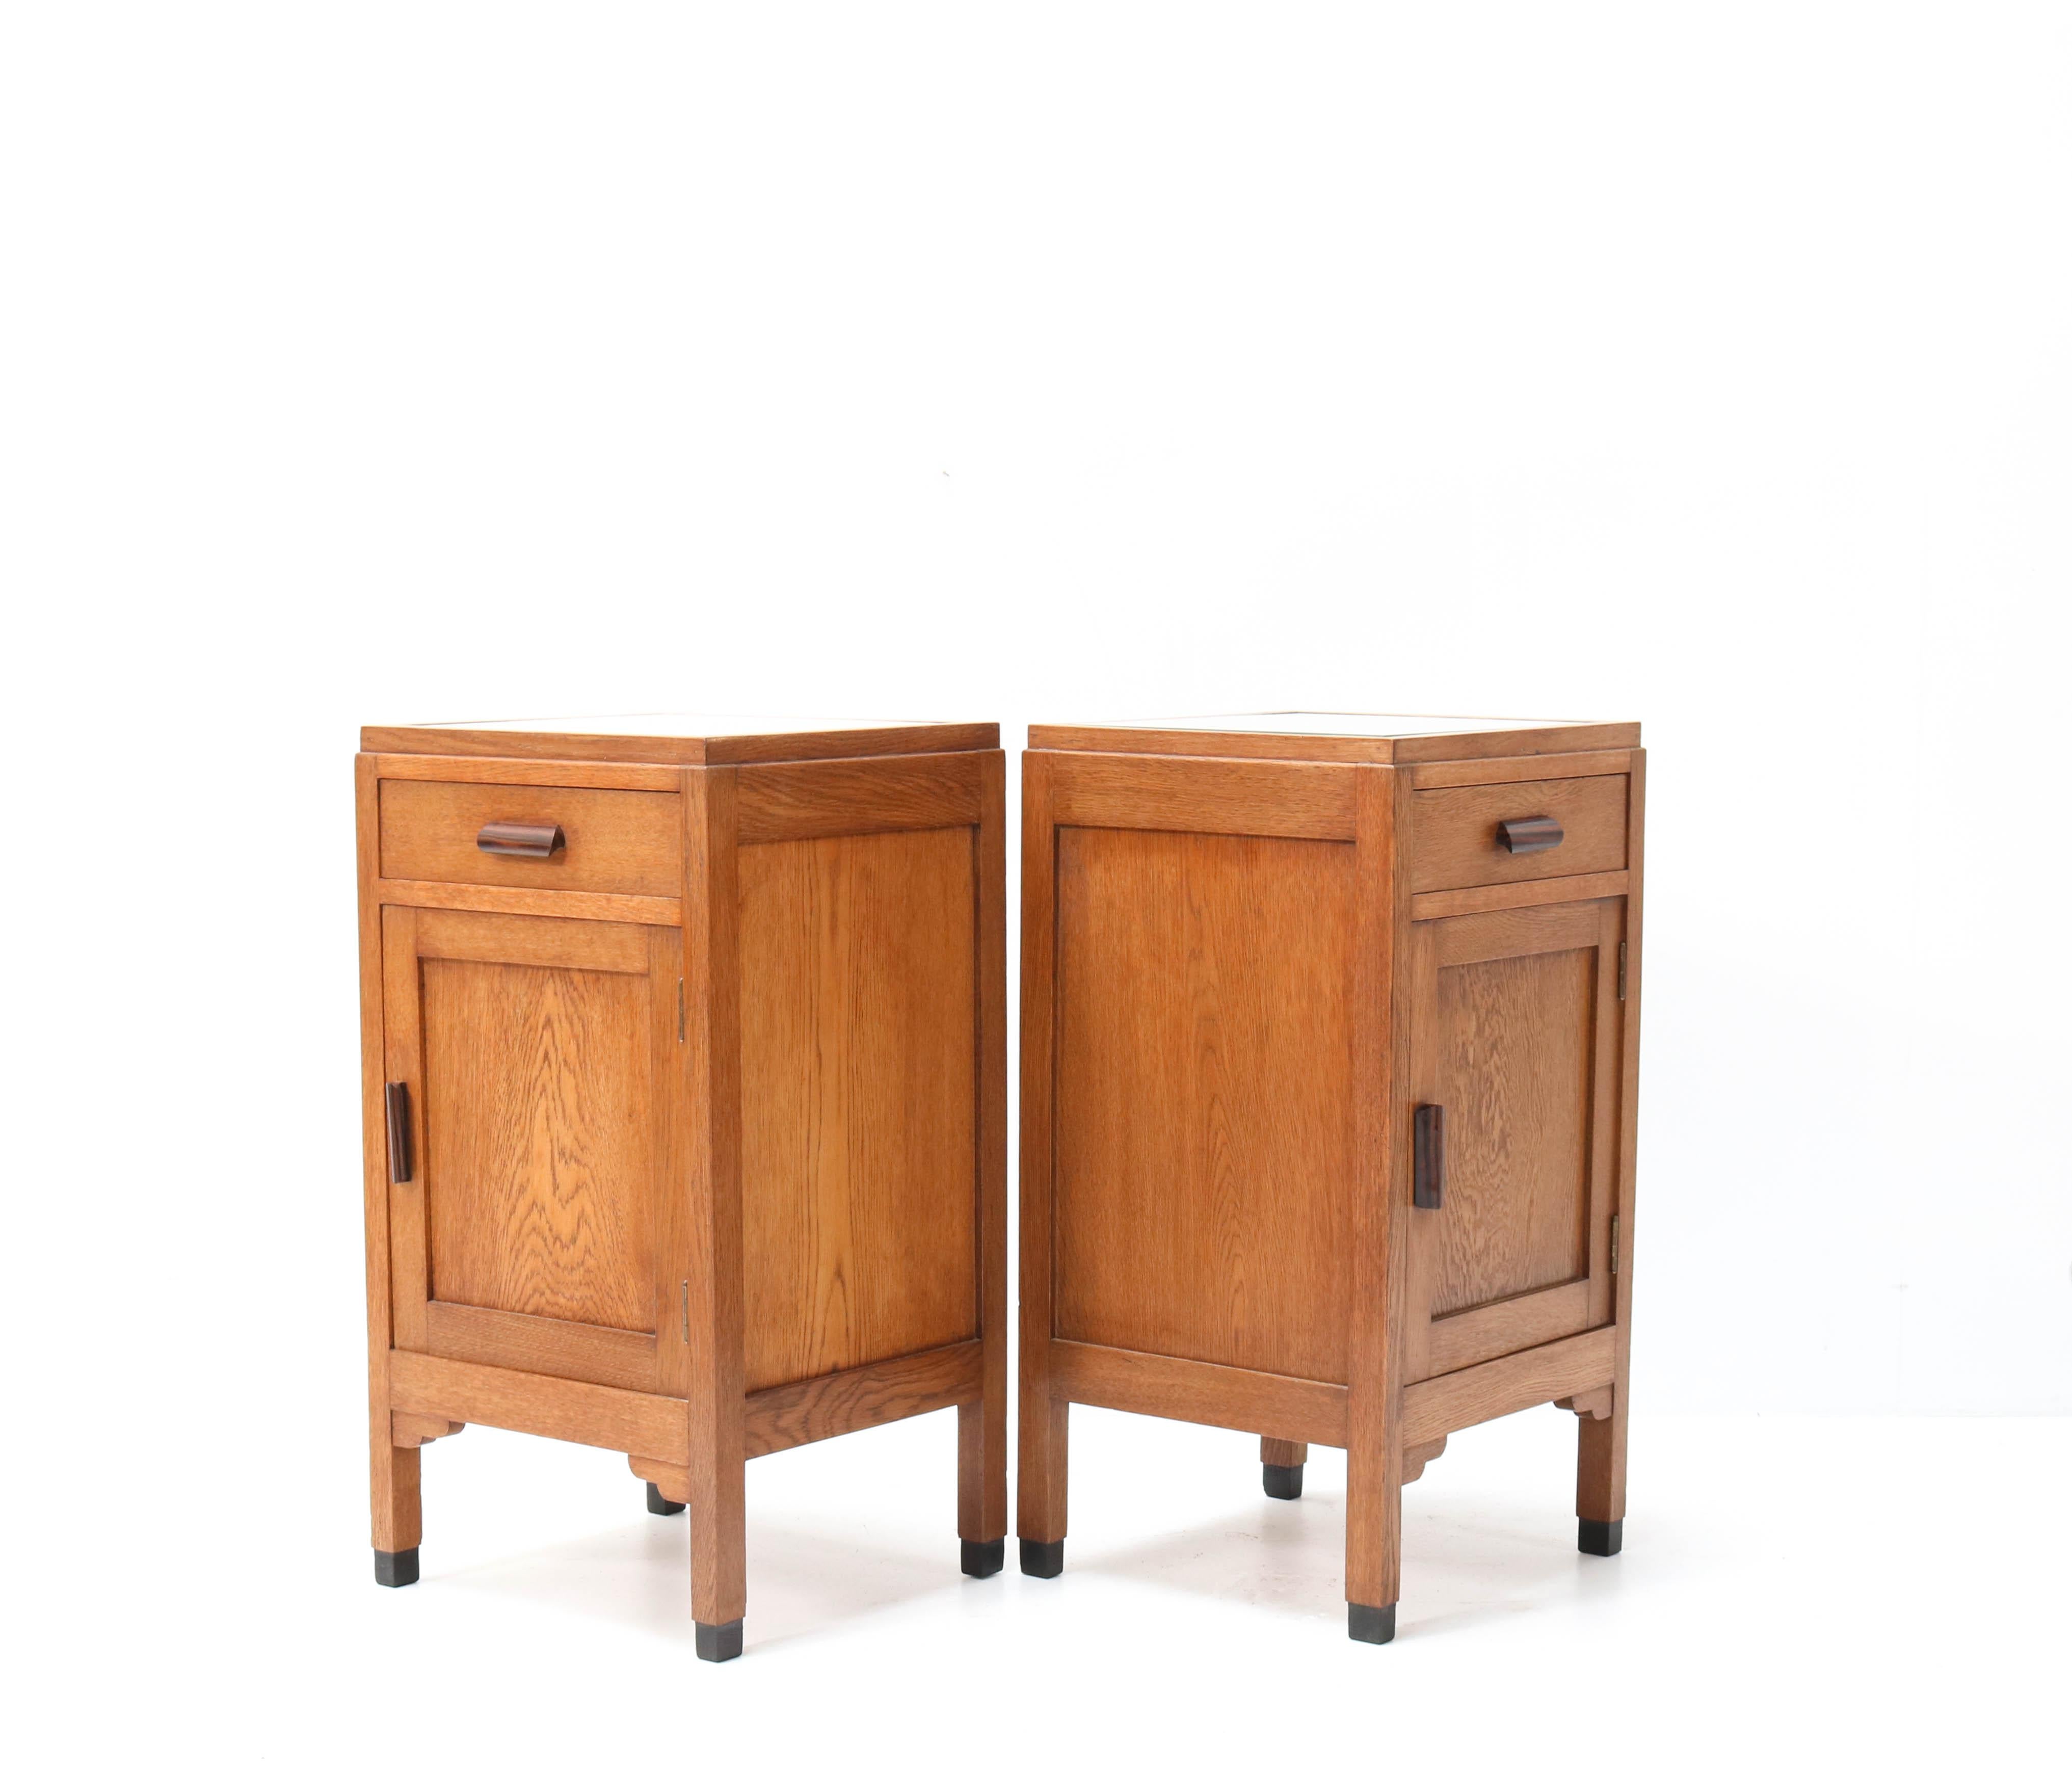 Early 20th Century Two Oak Art Deco Amsterdam School Nightstand or Bedside Tables by Fa. Drilling